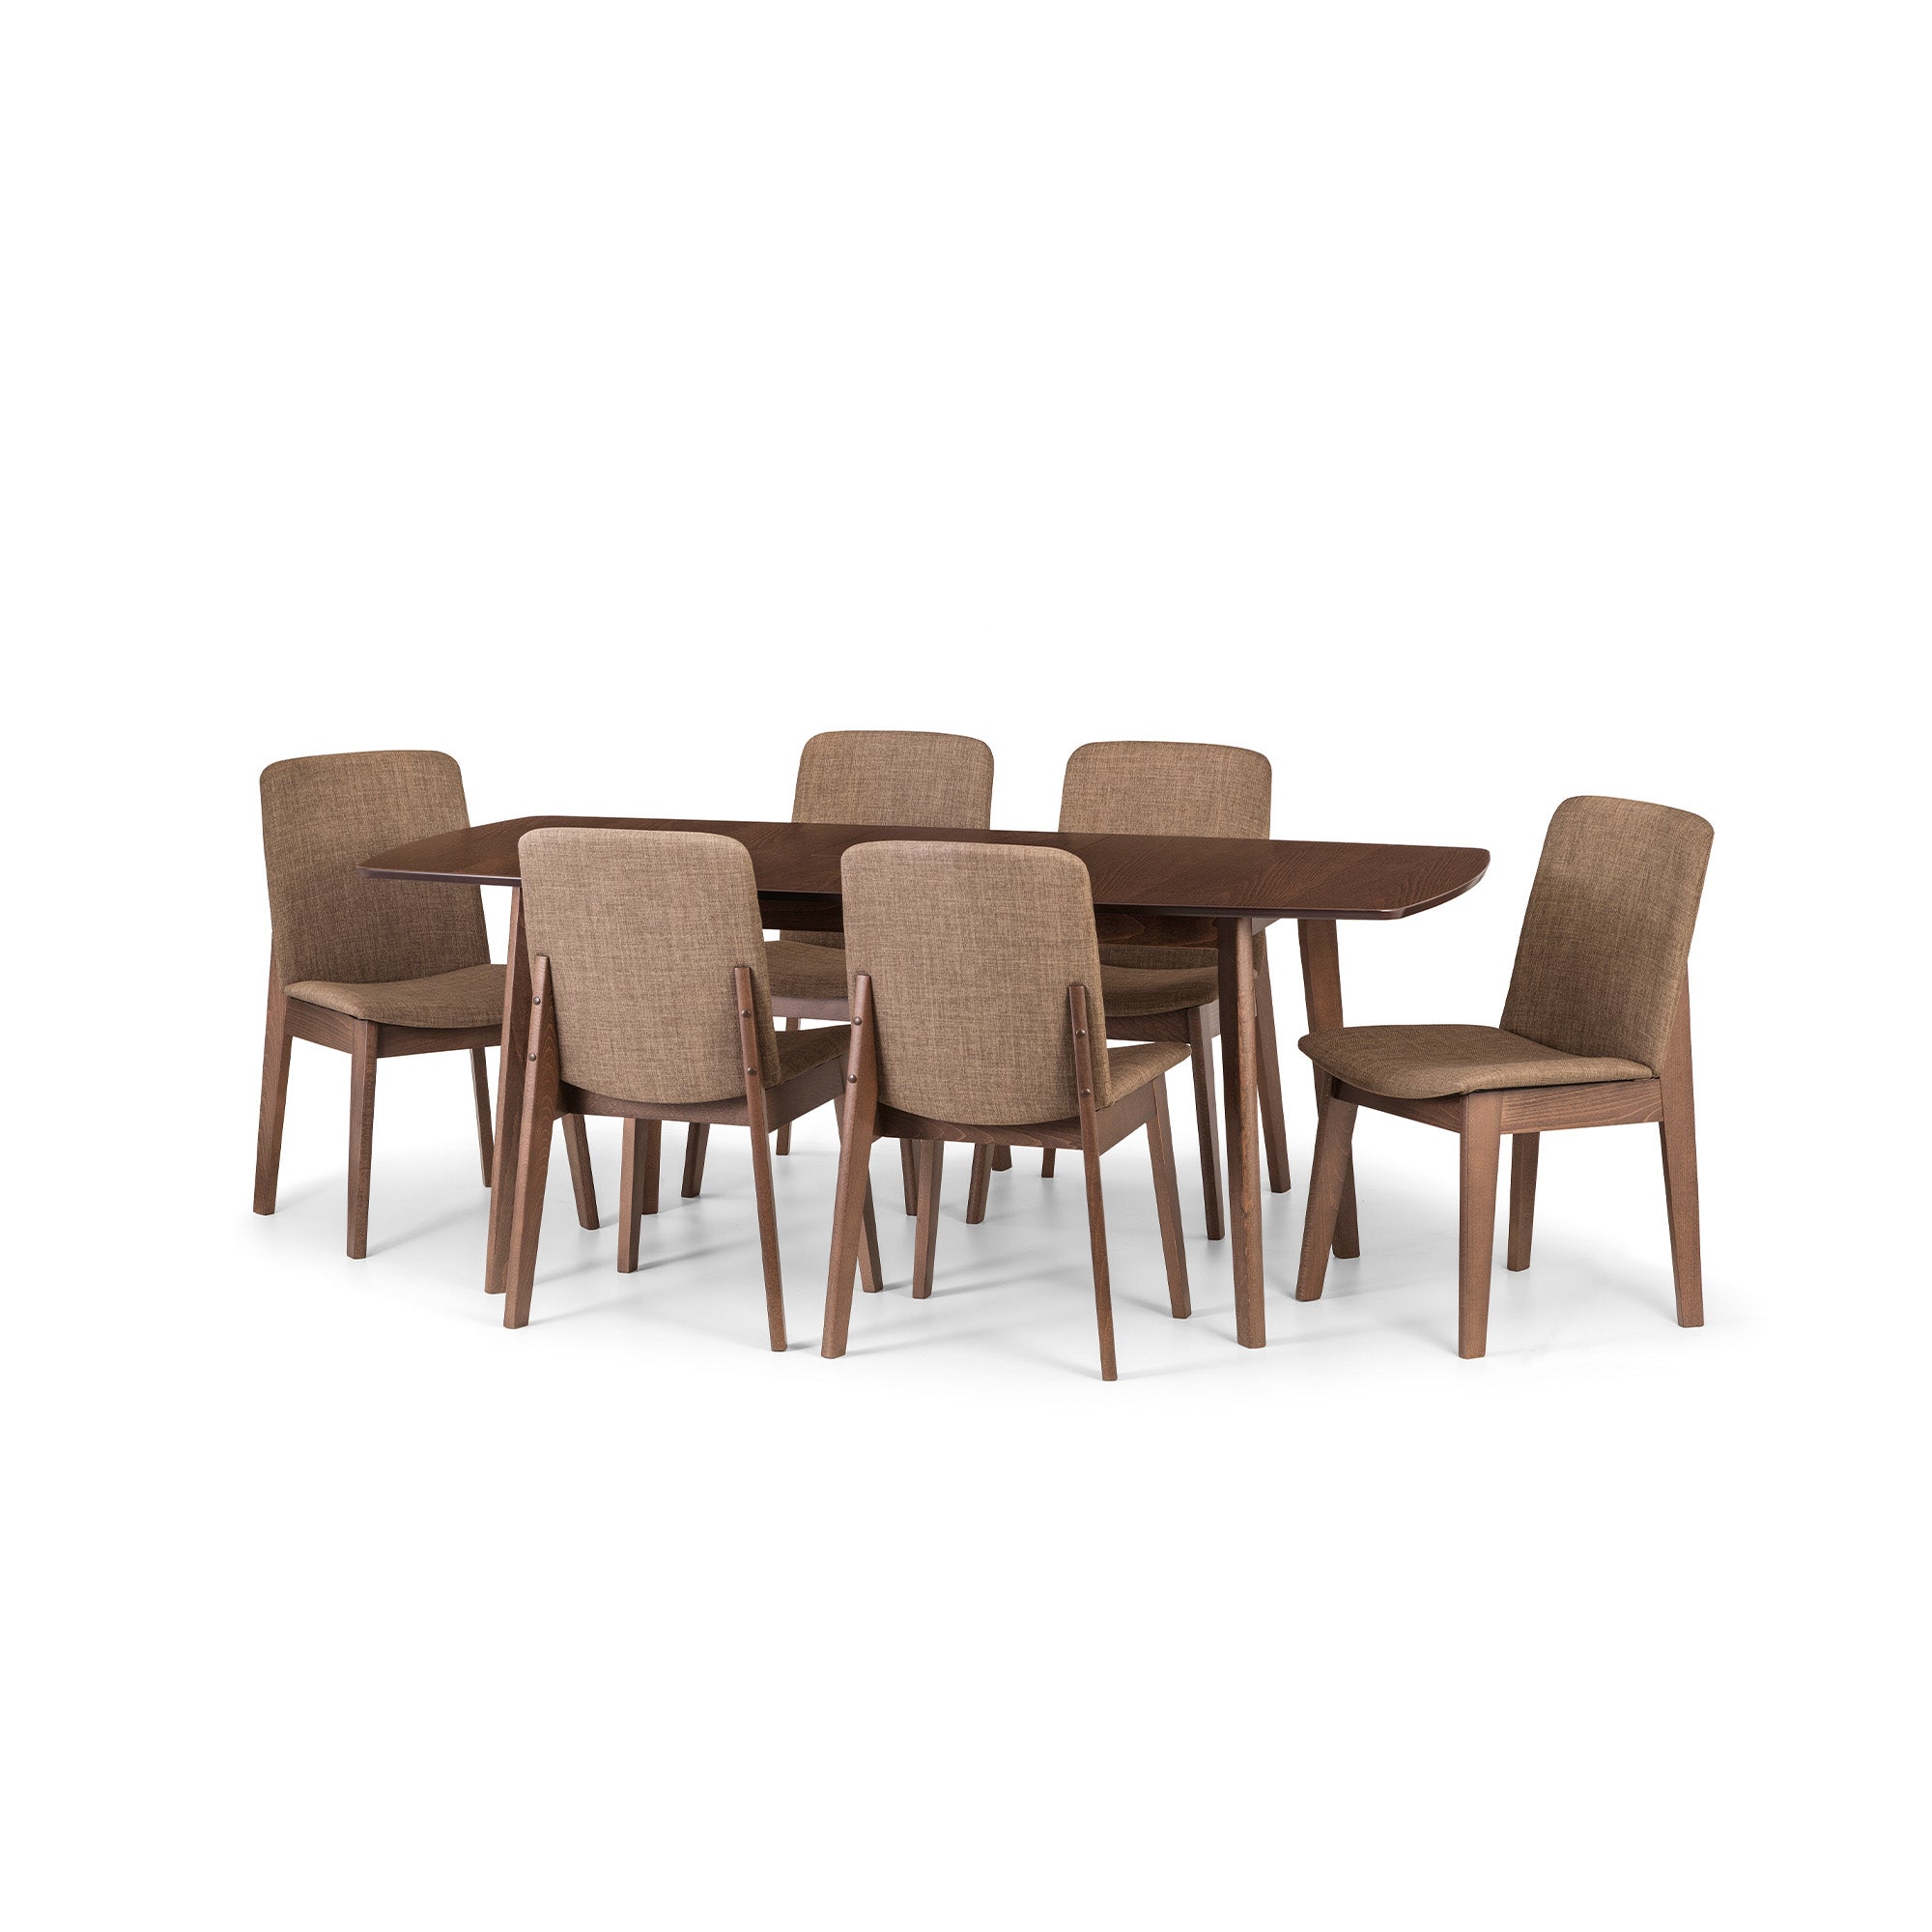 Kensington Rectangular Extendable Dining Table with 6 Chairs, Beech Wood